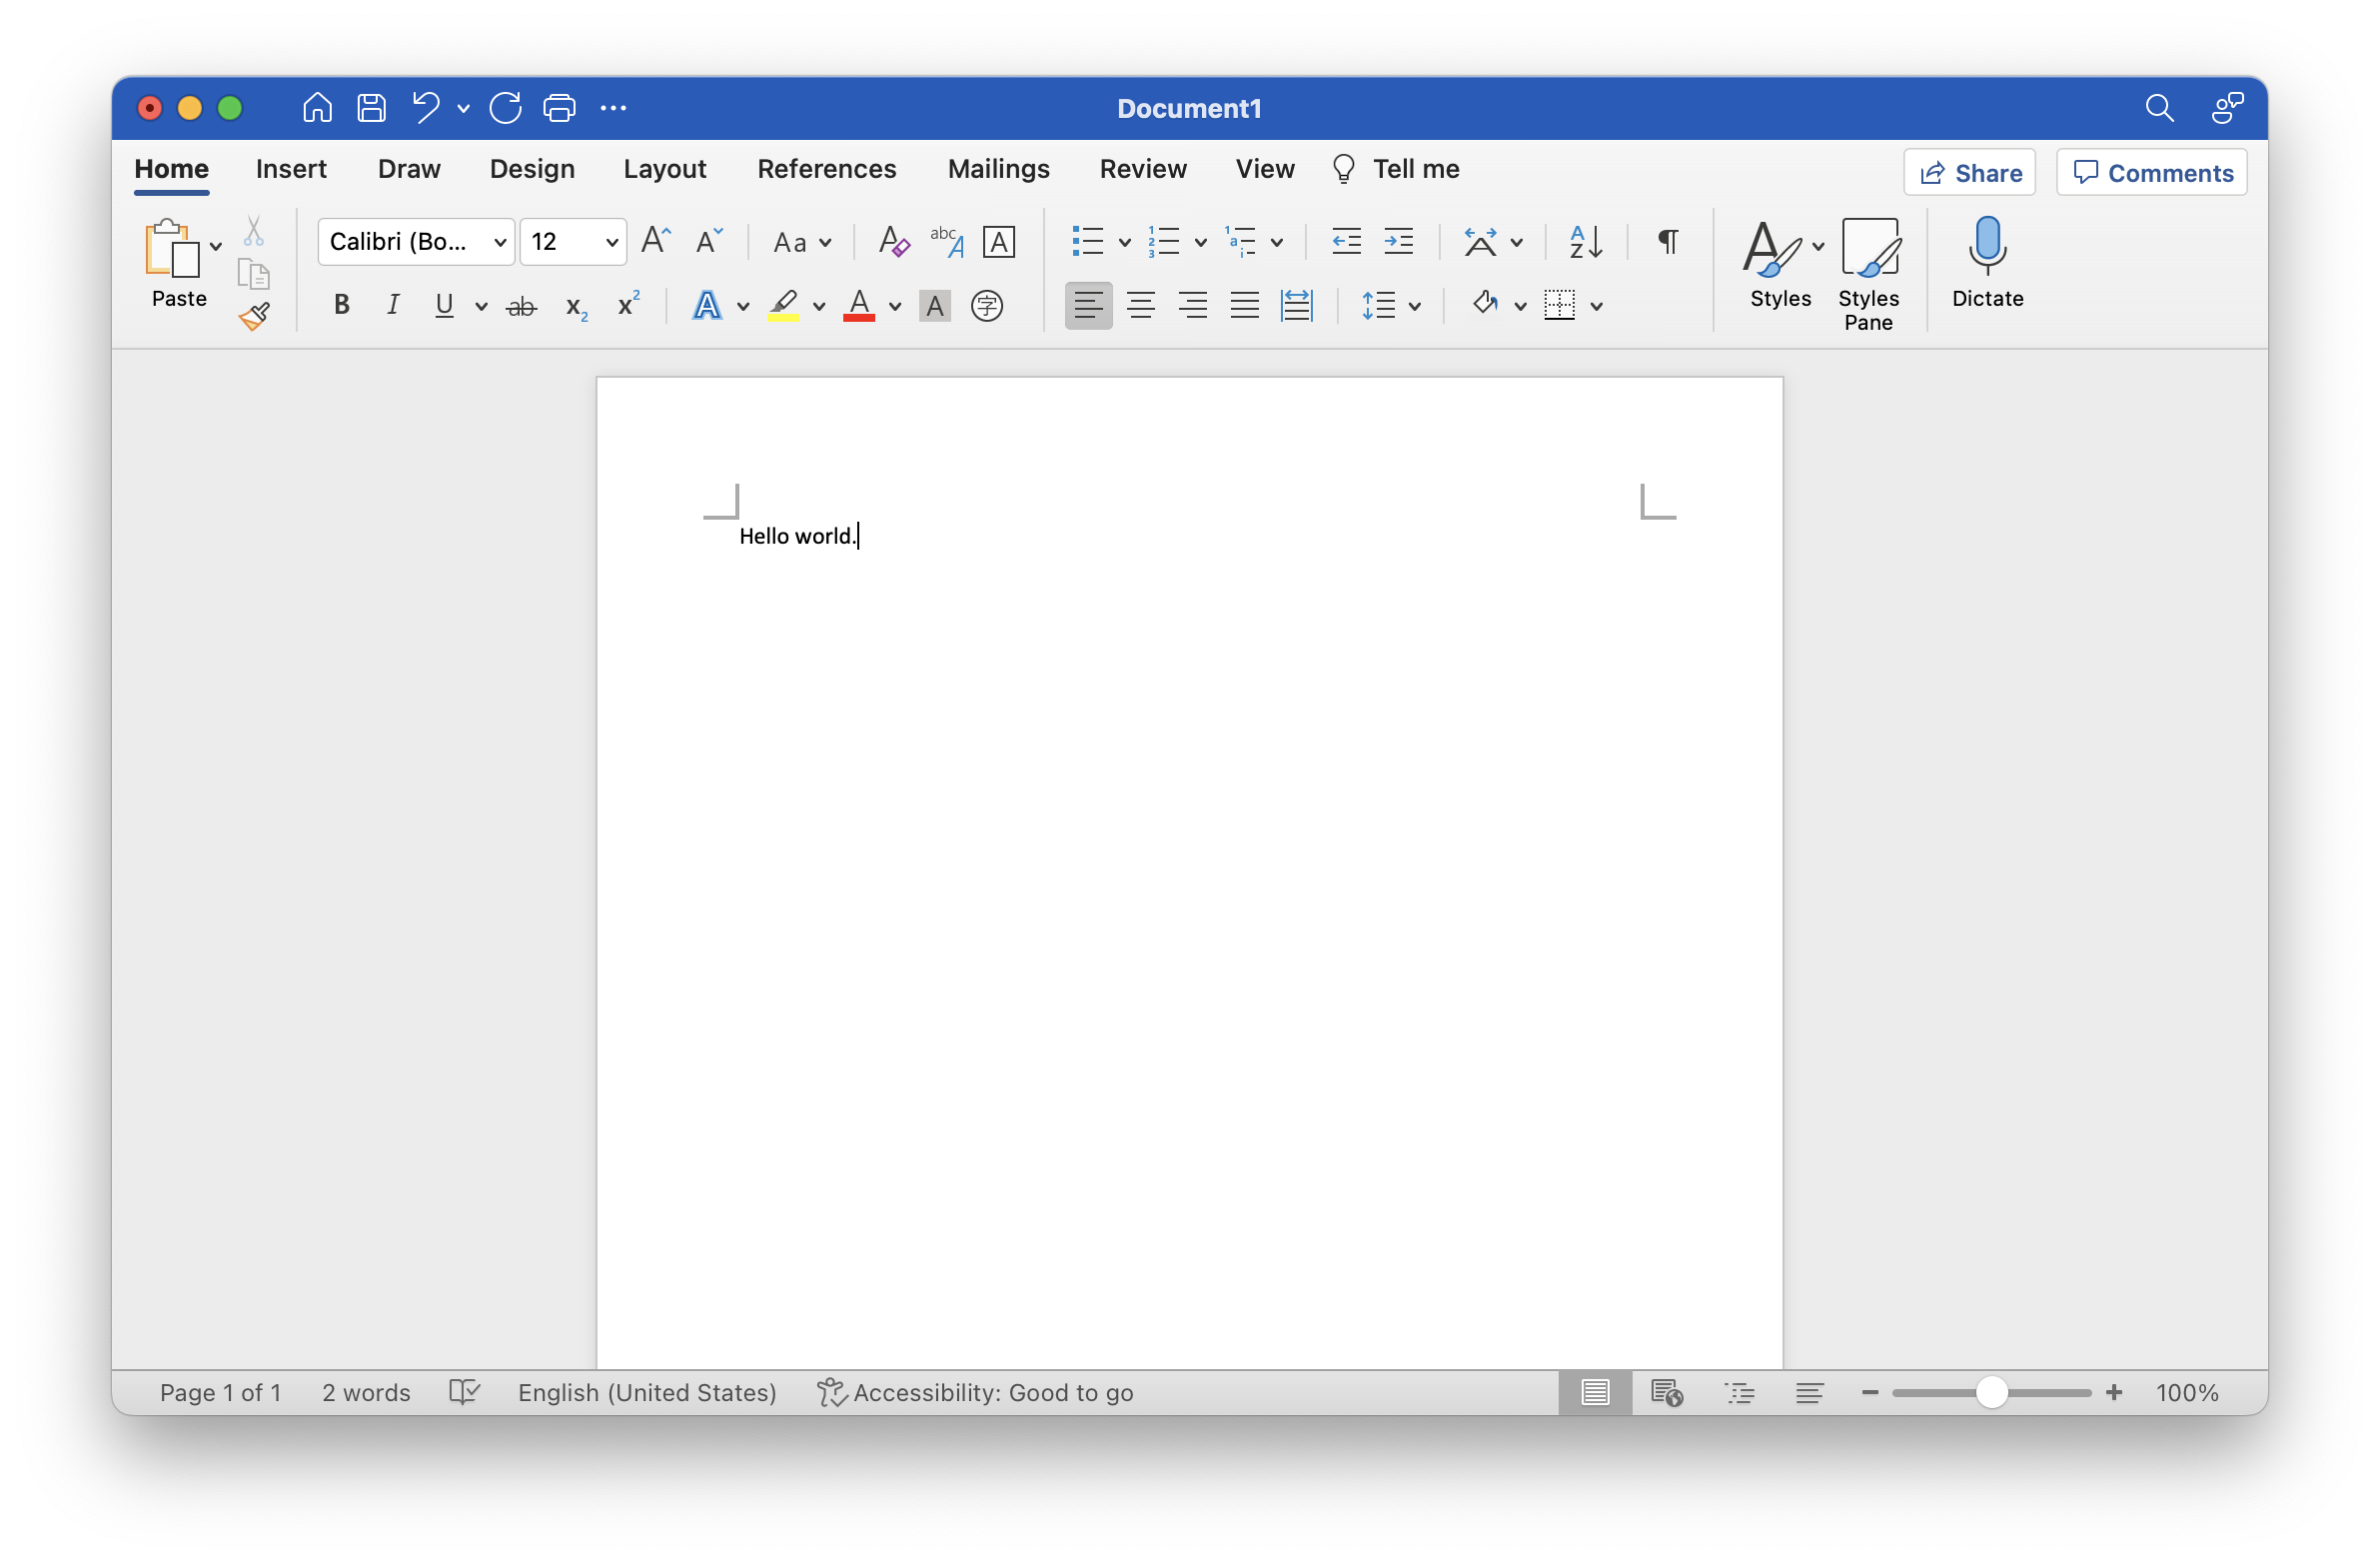 iA Writer compared to MS Word